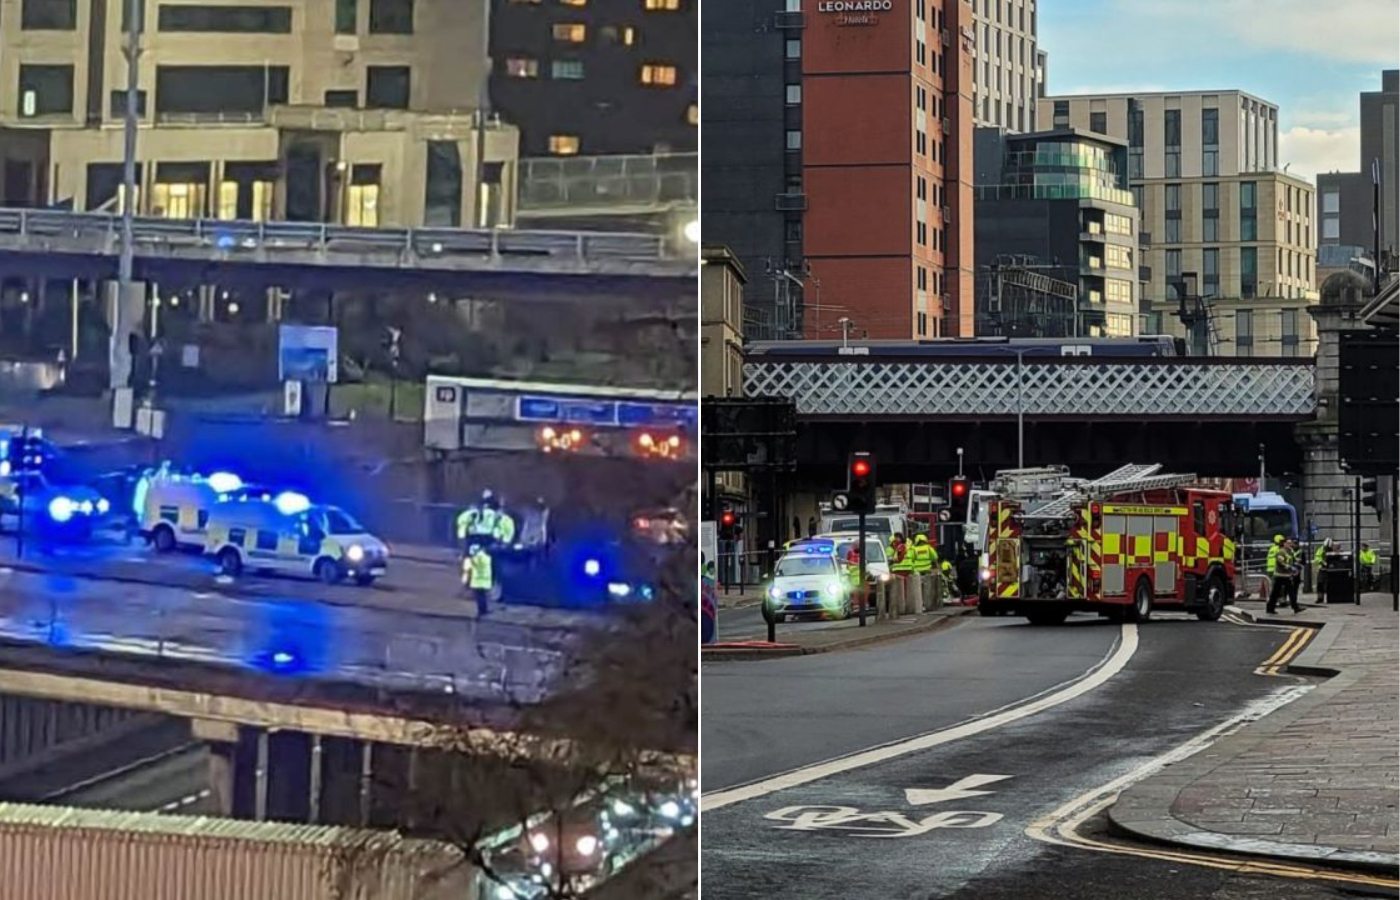 Three fatal crashes took place in Glasgow city centre within a week.